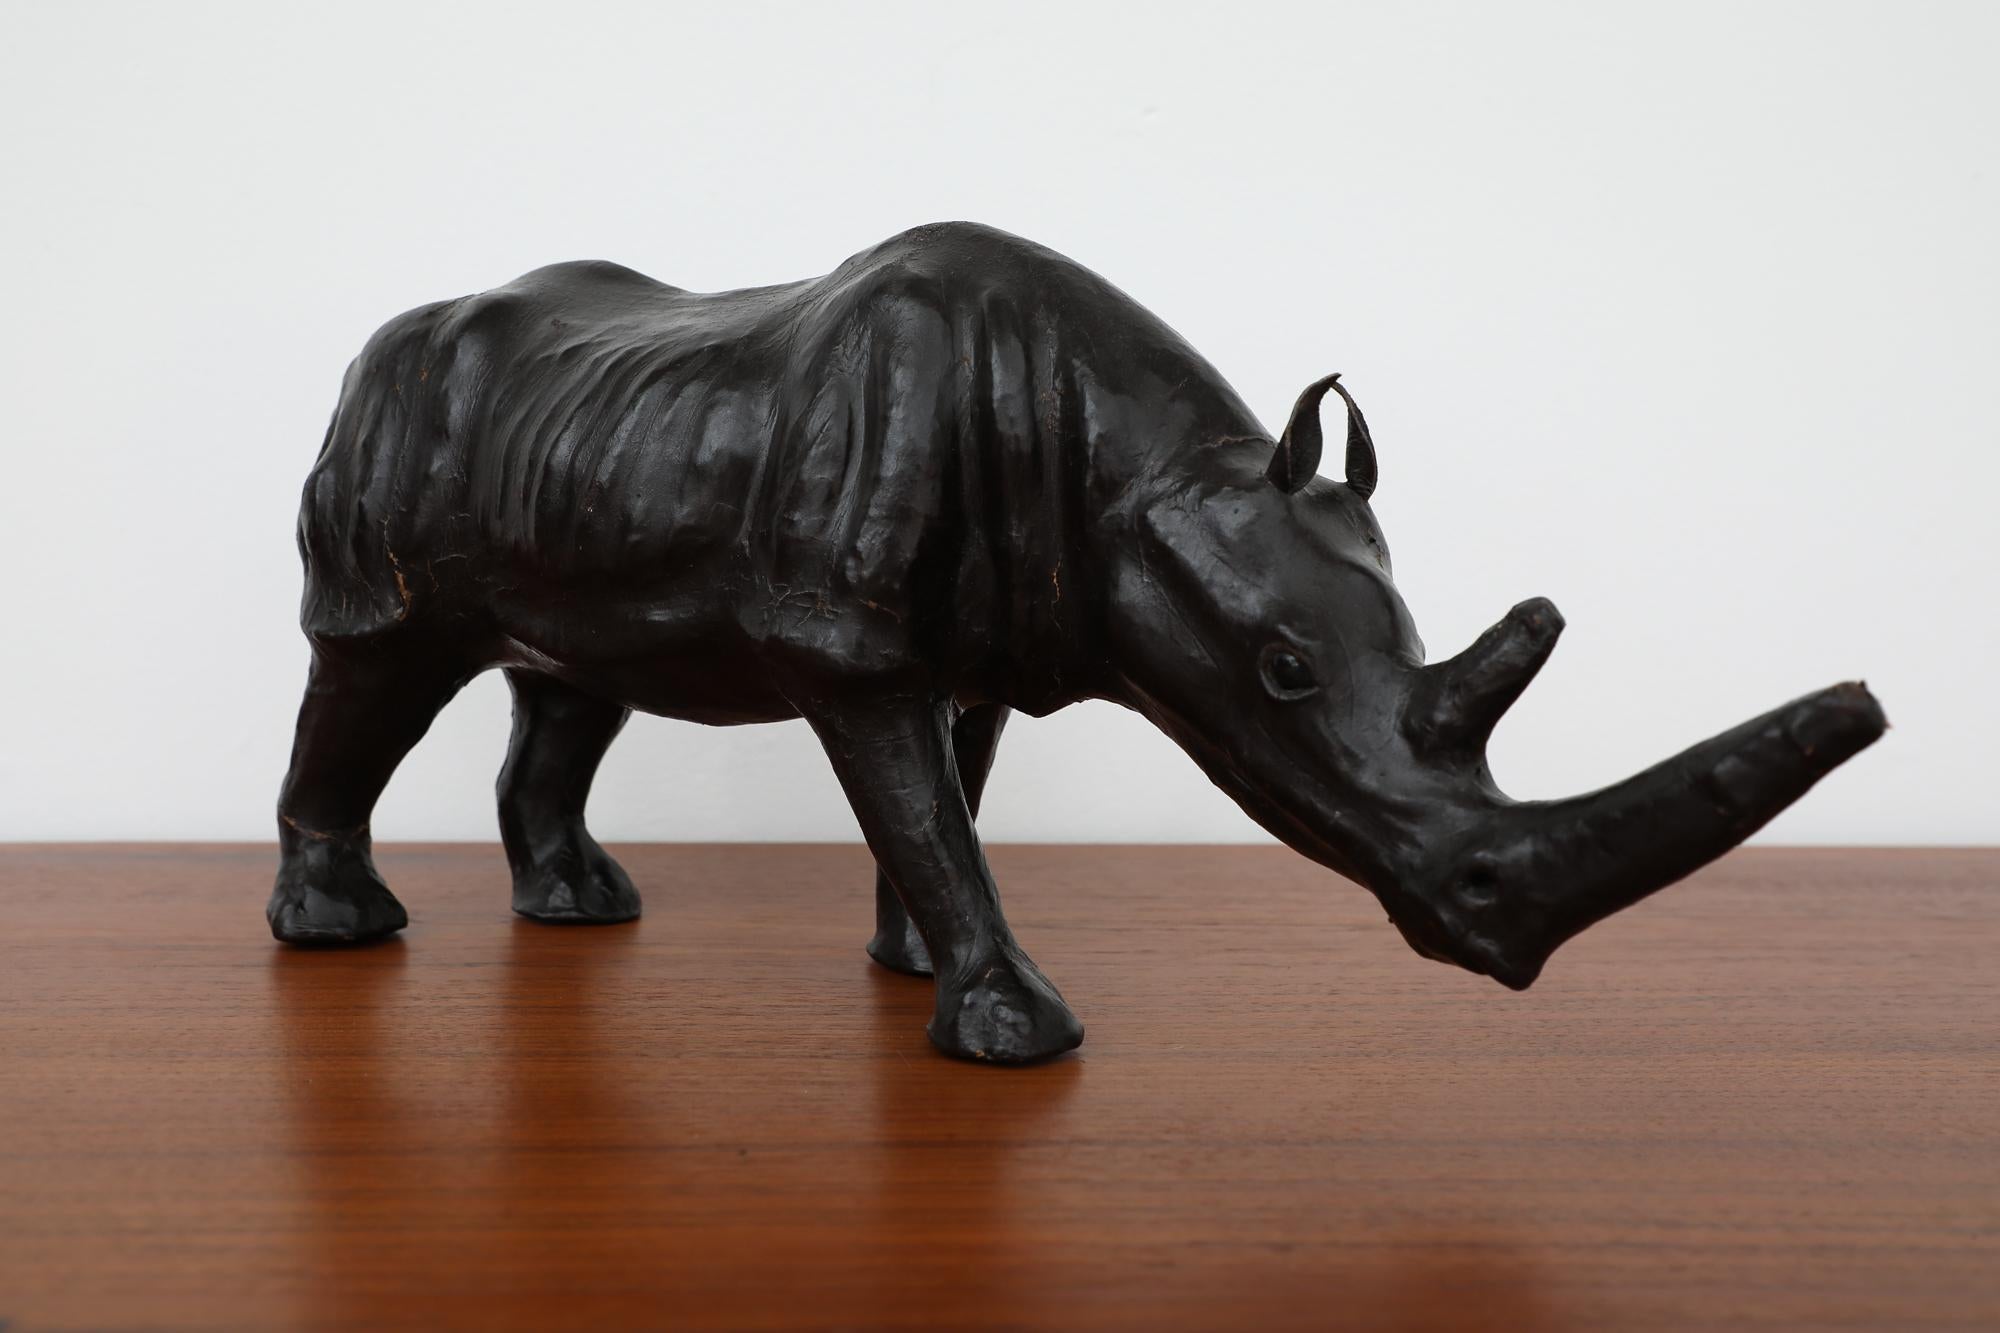 Mid-Century leather wrapped rhinoceros statue. In original condition with visible wear consistent with its age and use.